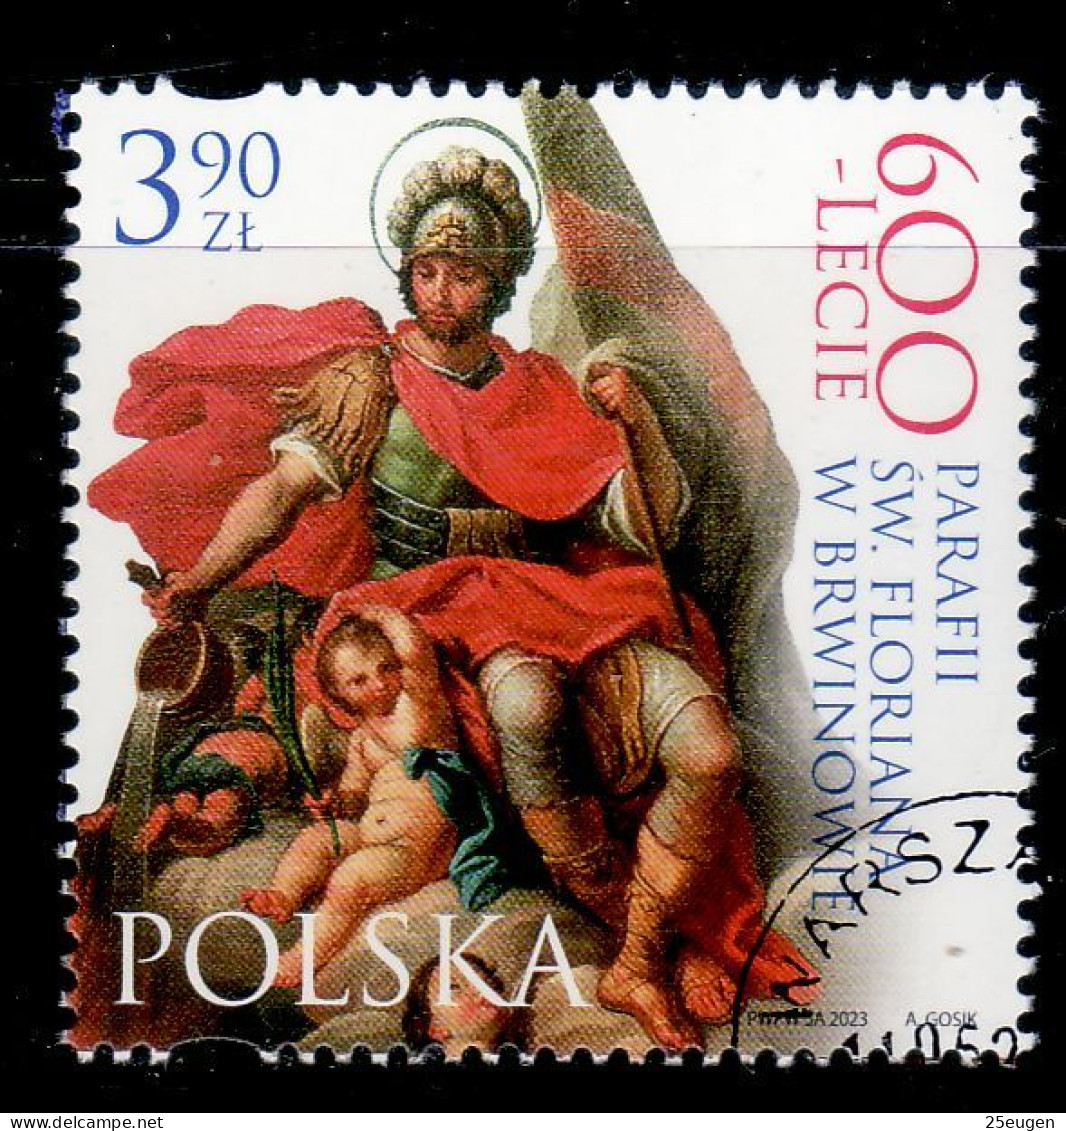 POLAND 2023  600th Anniversary Of The Parish Of St. Florian In Brwinów  USED - Used Stamps